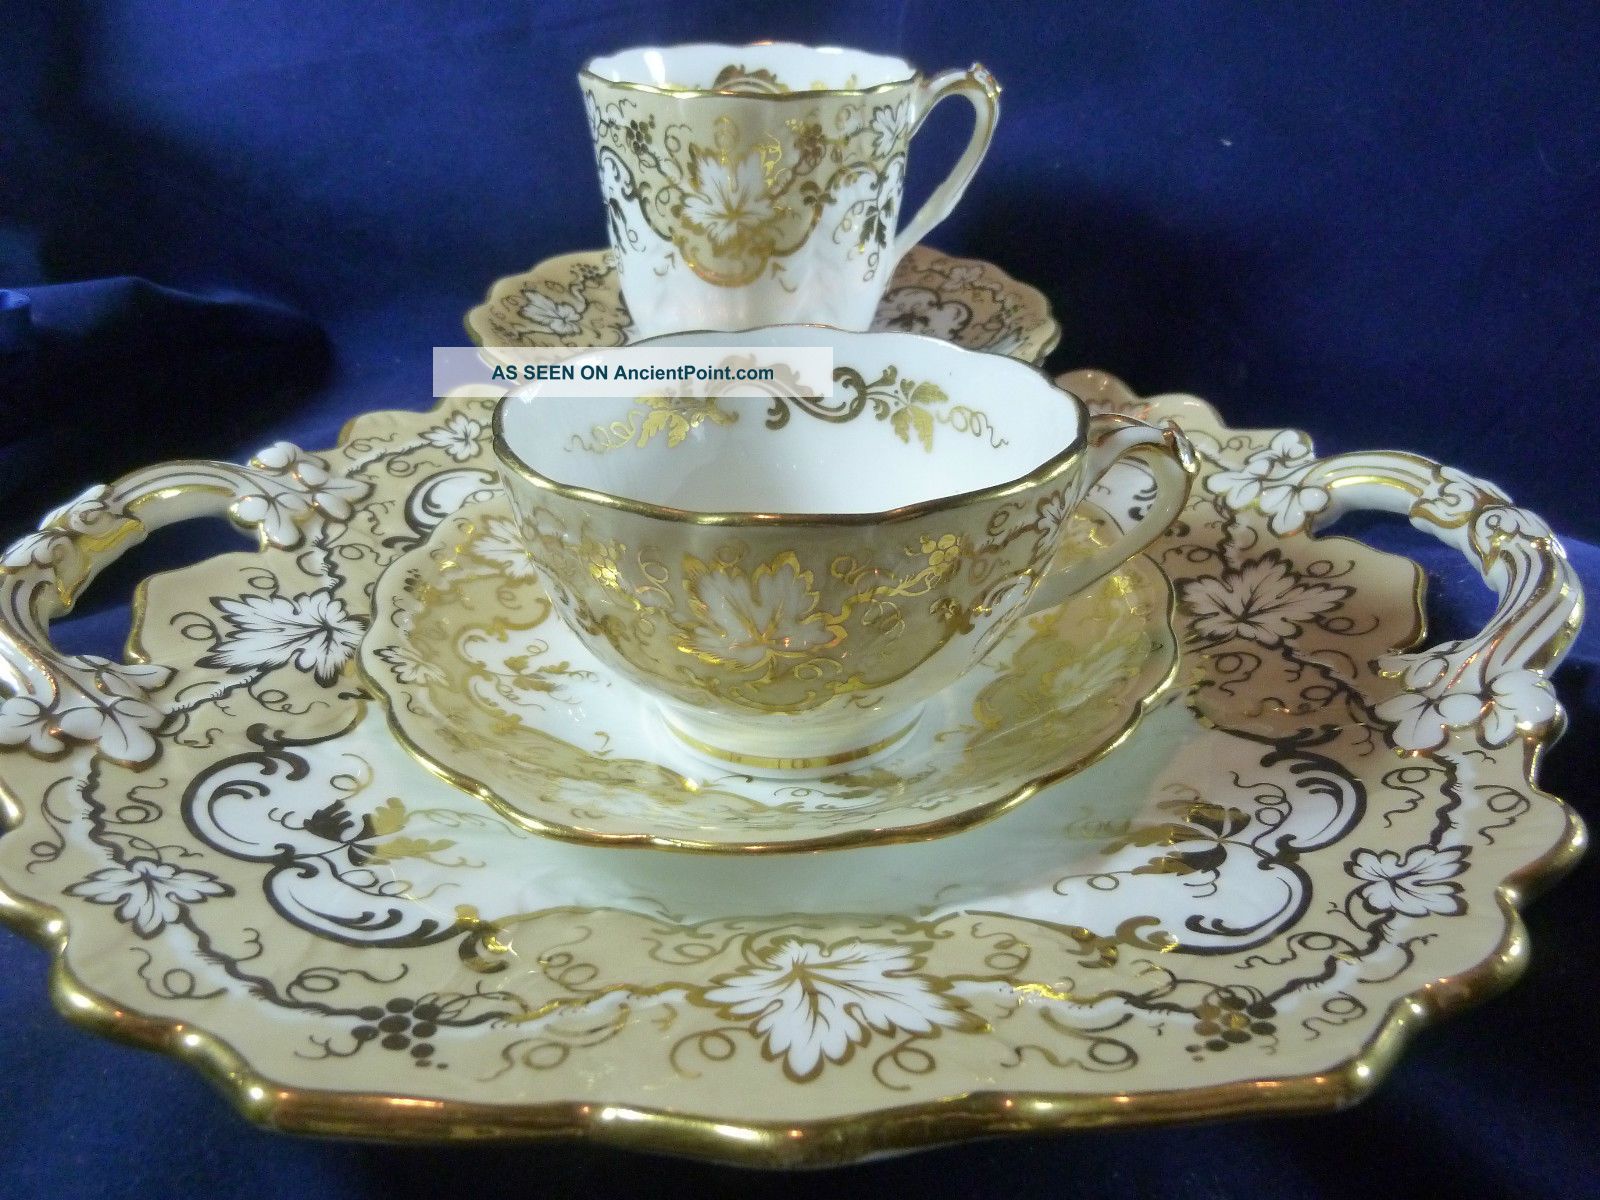 Antique Ridgway Tea & Coffee Cup And Saucer & Cake Plate Split Handle C1820+ Cups & Saucers photo